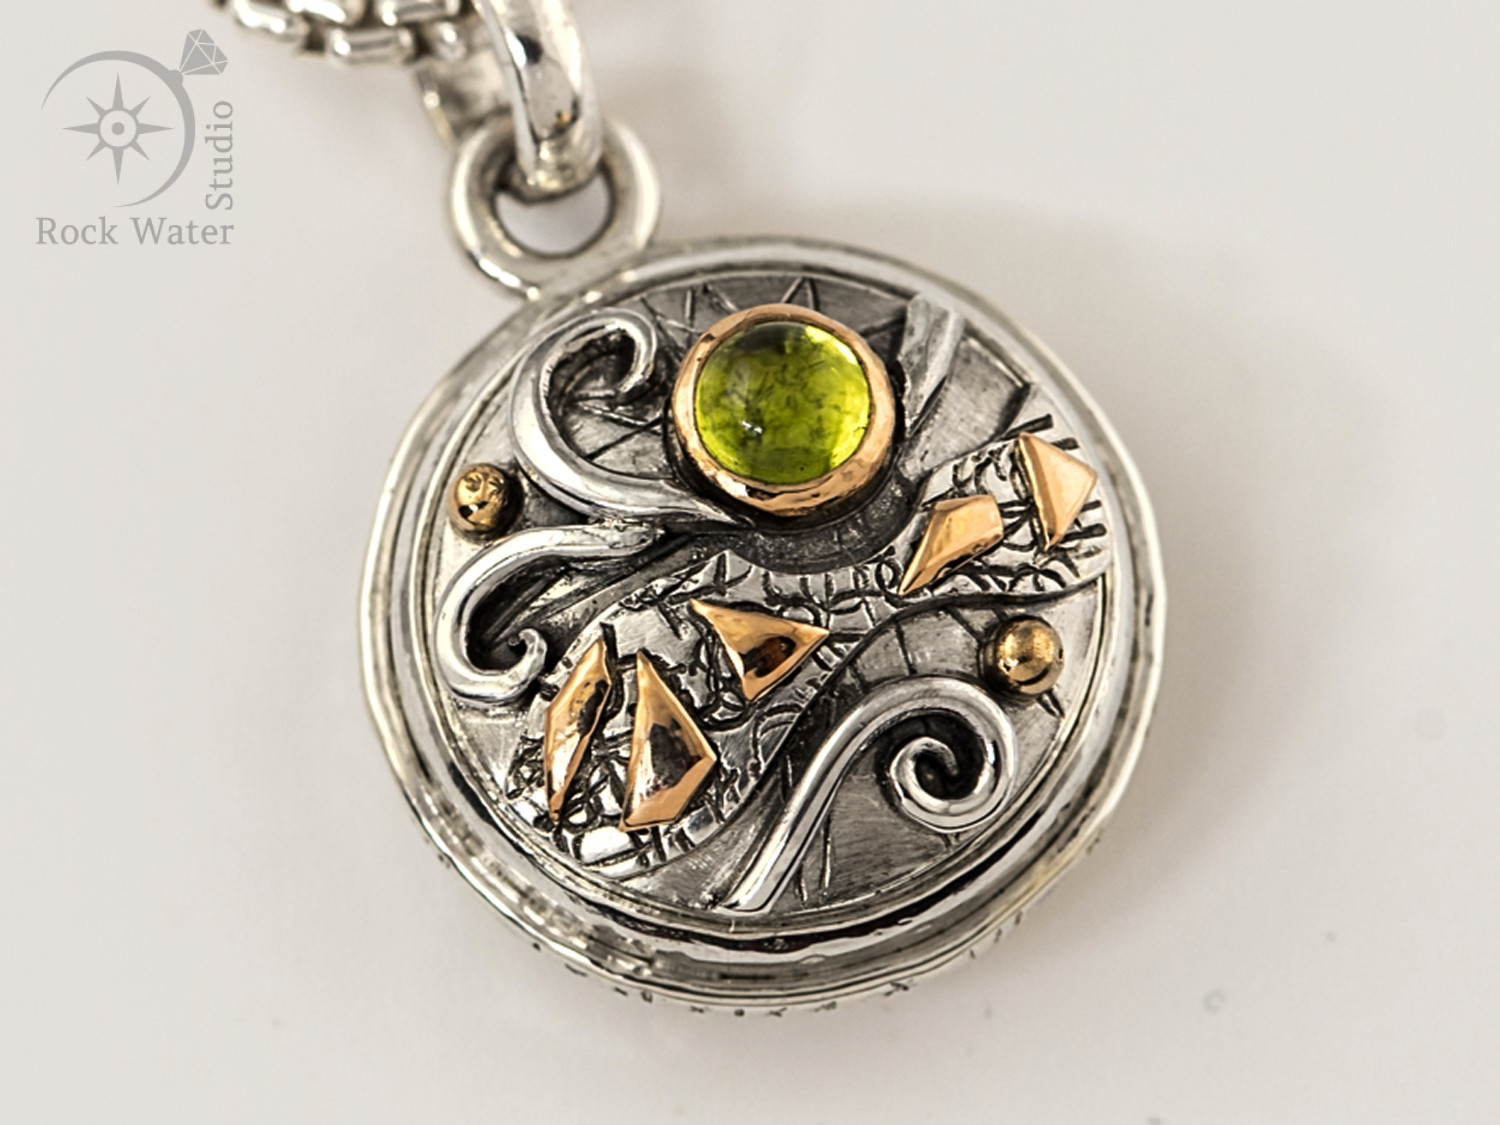 Finished Custom Made Compass Pendant with Peridot